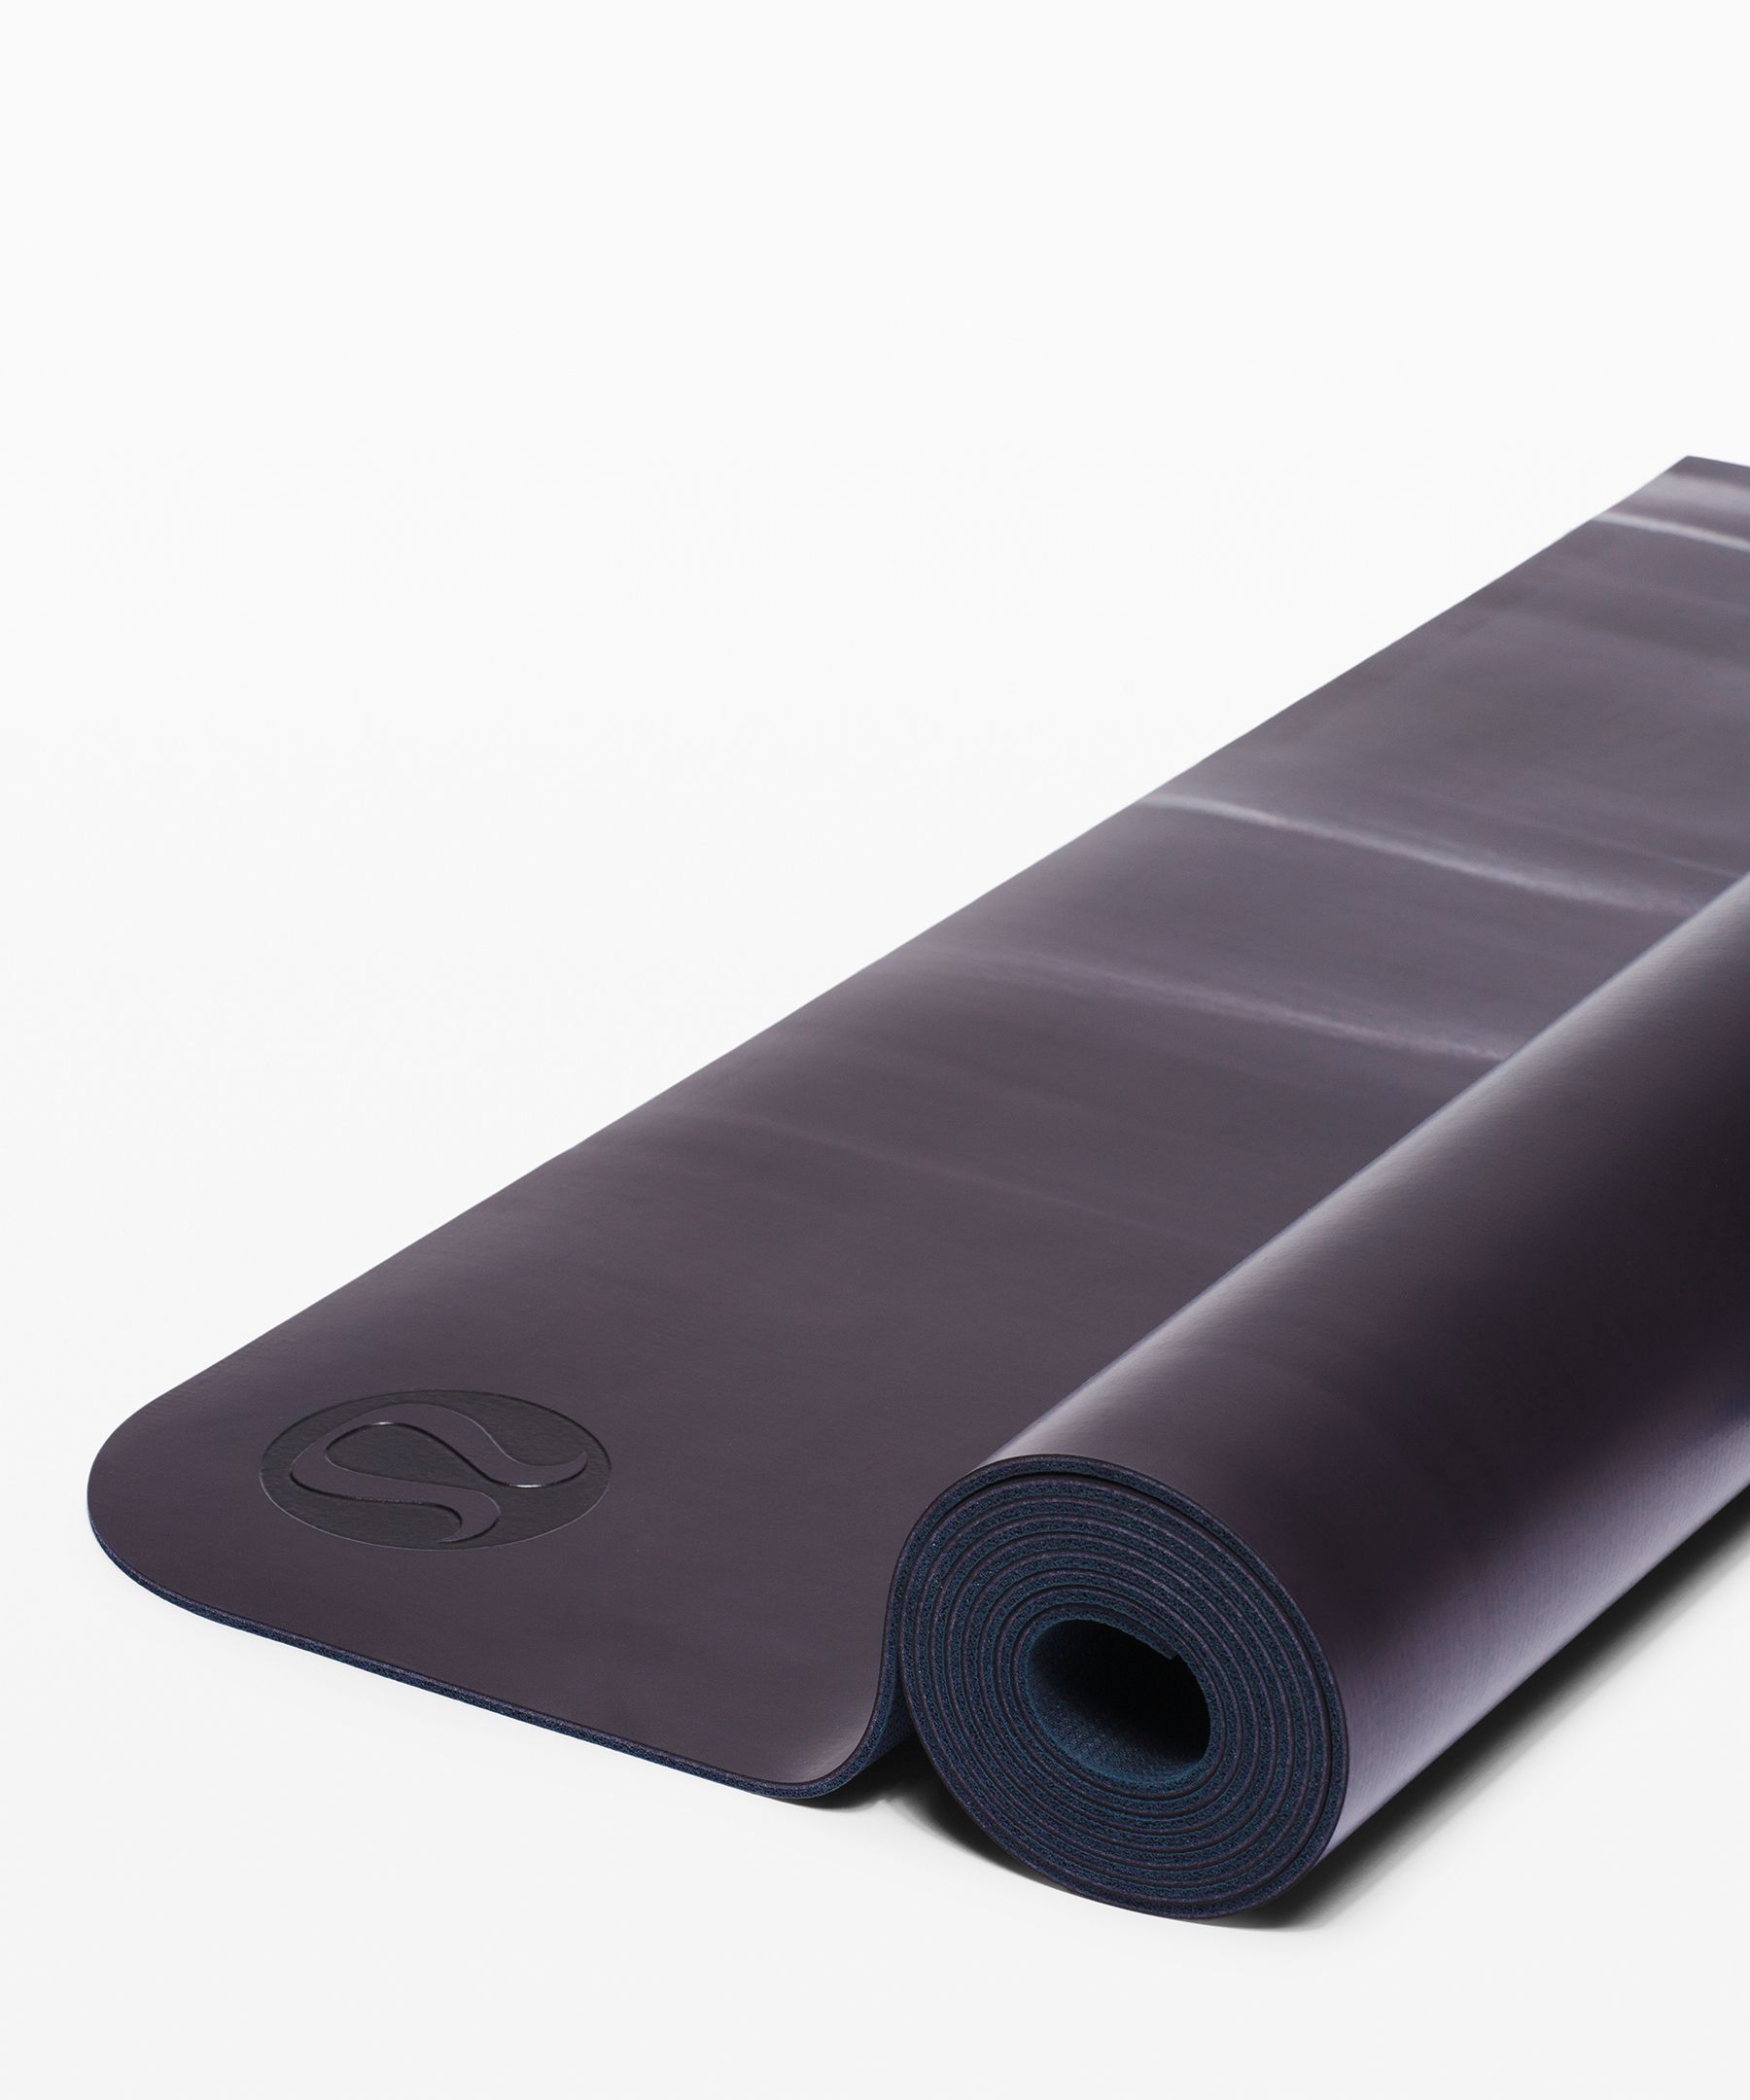 Lululemon Reversible Mat Which Side To Used Cars